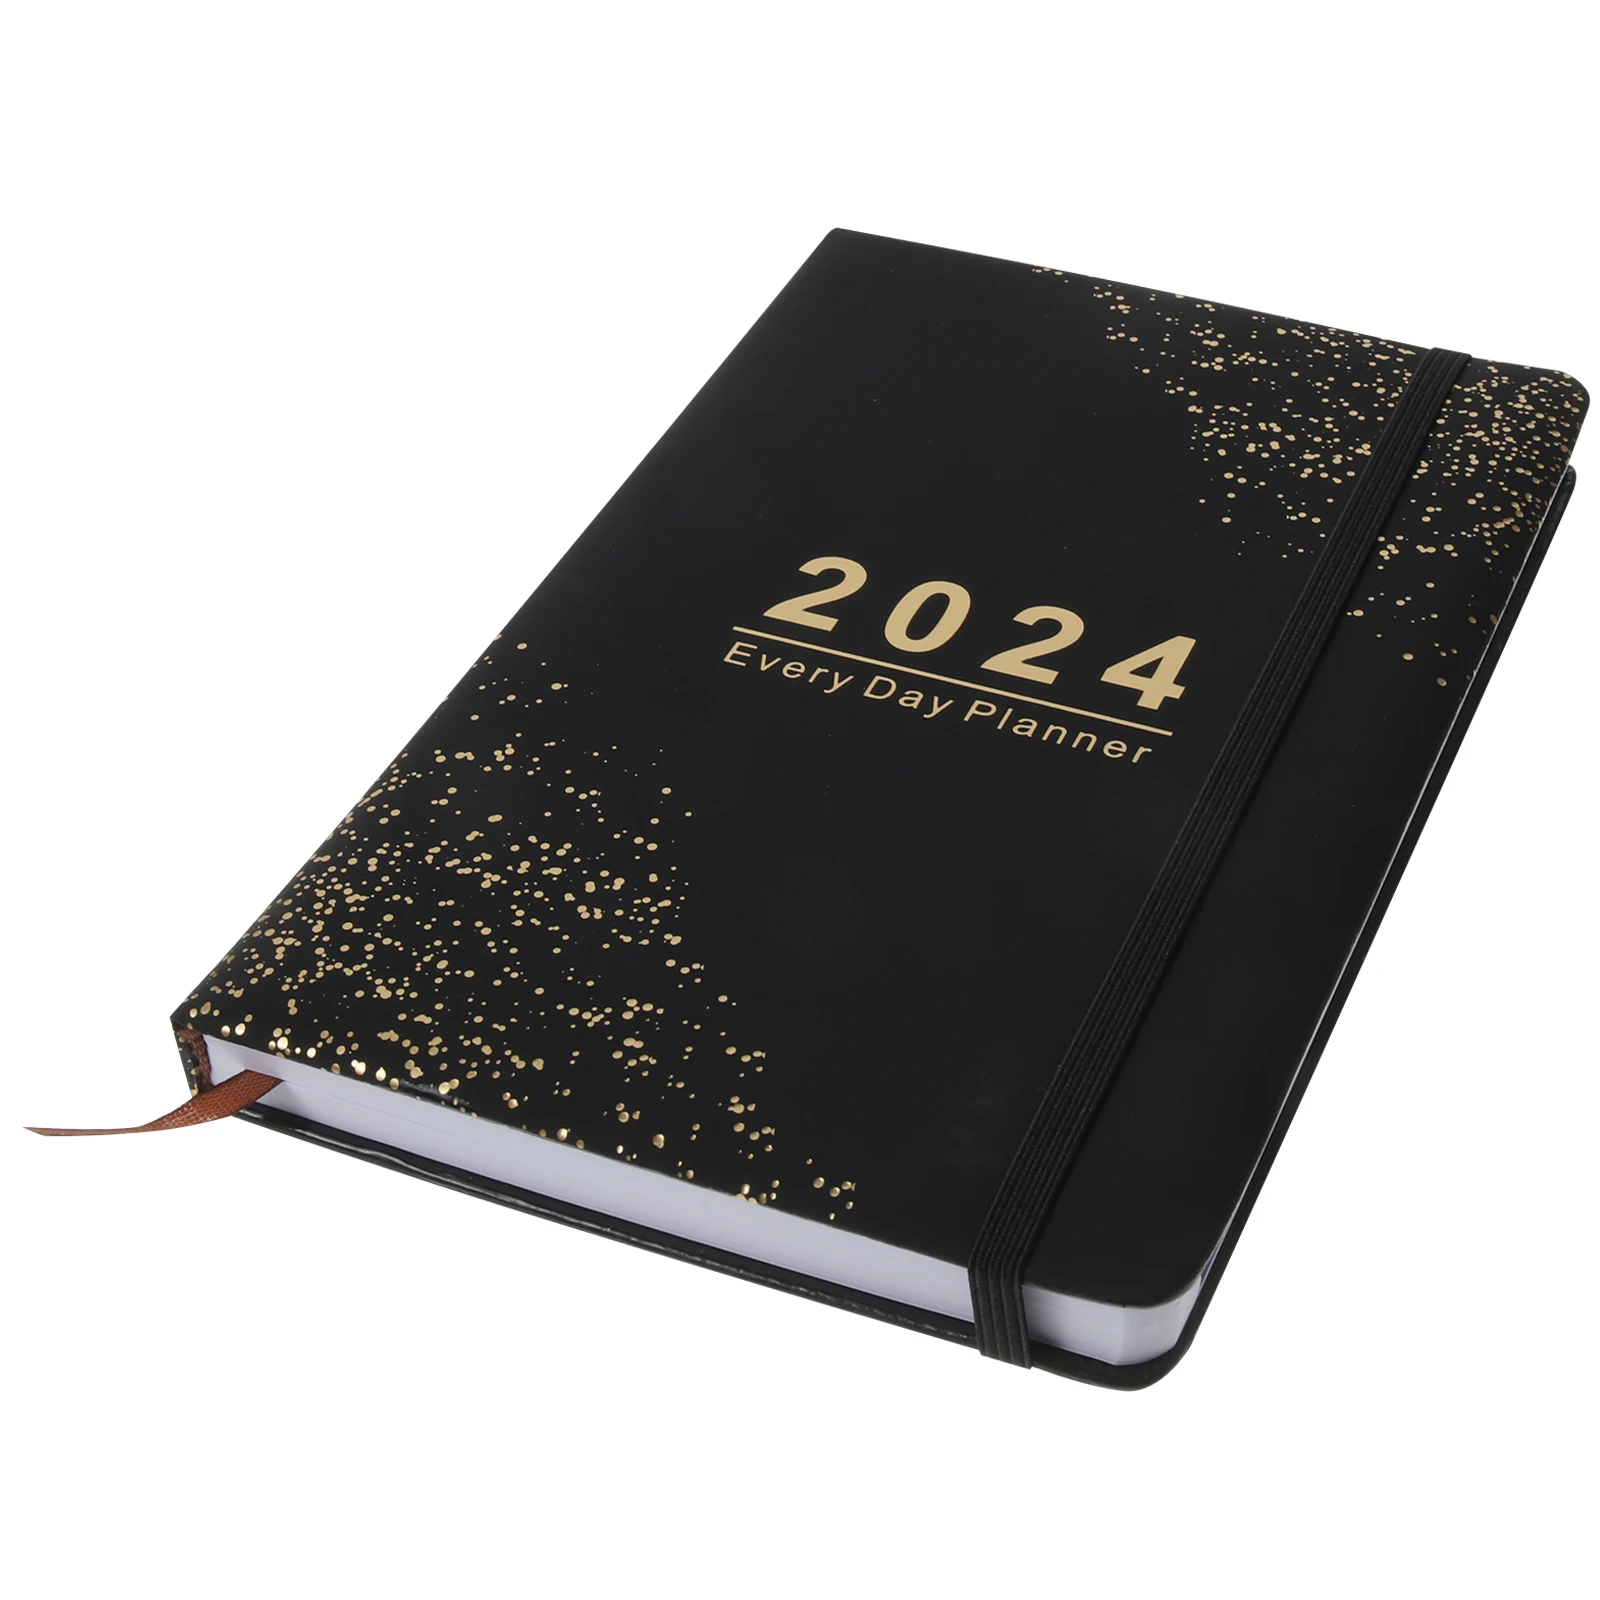 2024 Schedule Daily Schedule English Notebook Schedule Leather Cover Daily Schedule Schedule This Log Table Monthly Planner 2021 planner organizer a5 notebook agenda daily weekly schedule monthly school office supplies journals stationery